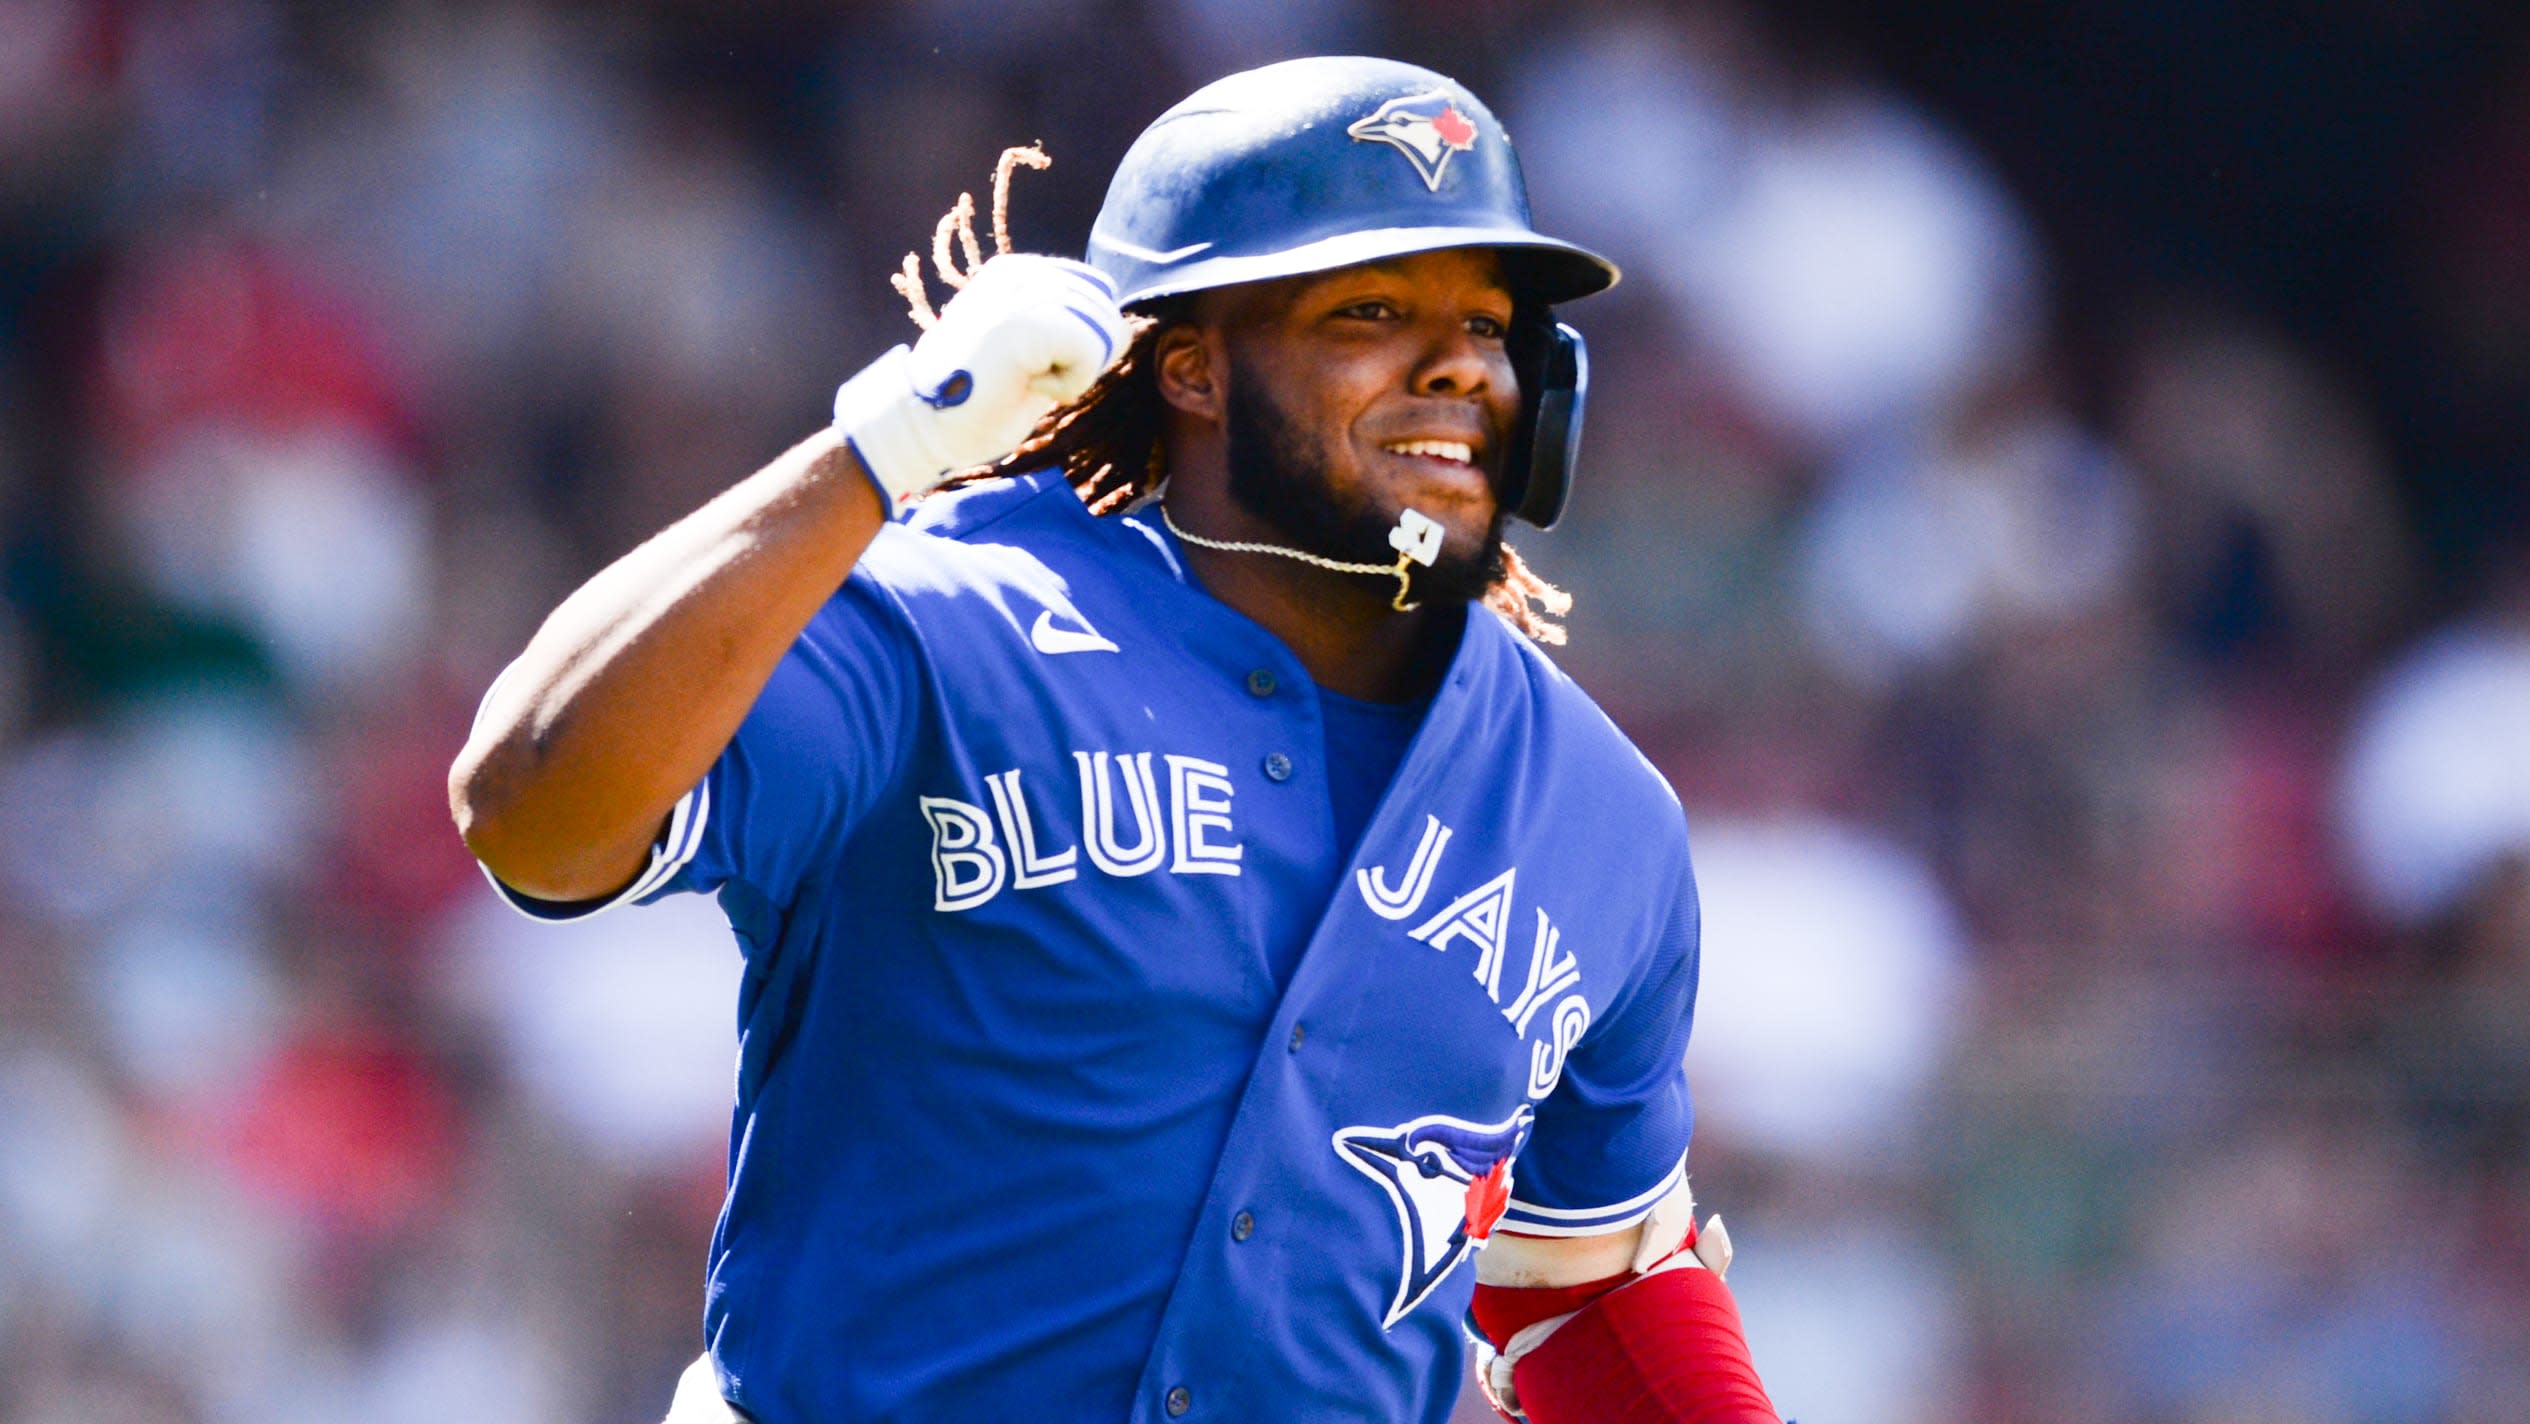 Toronto Blue Jays: Guerrero Jr. makes statement with All-Star Game MVP award